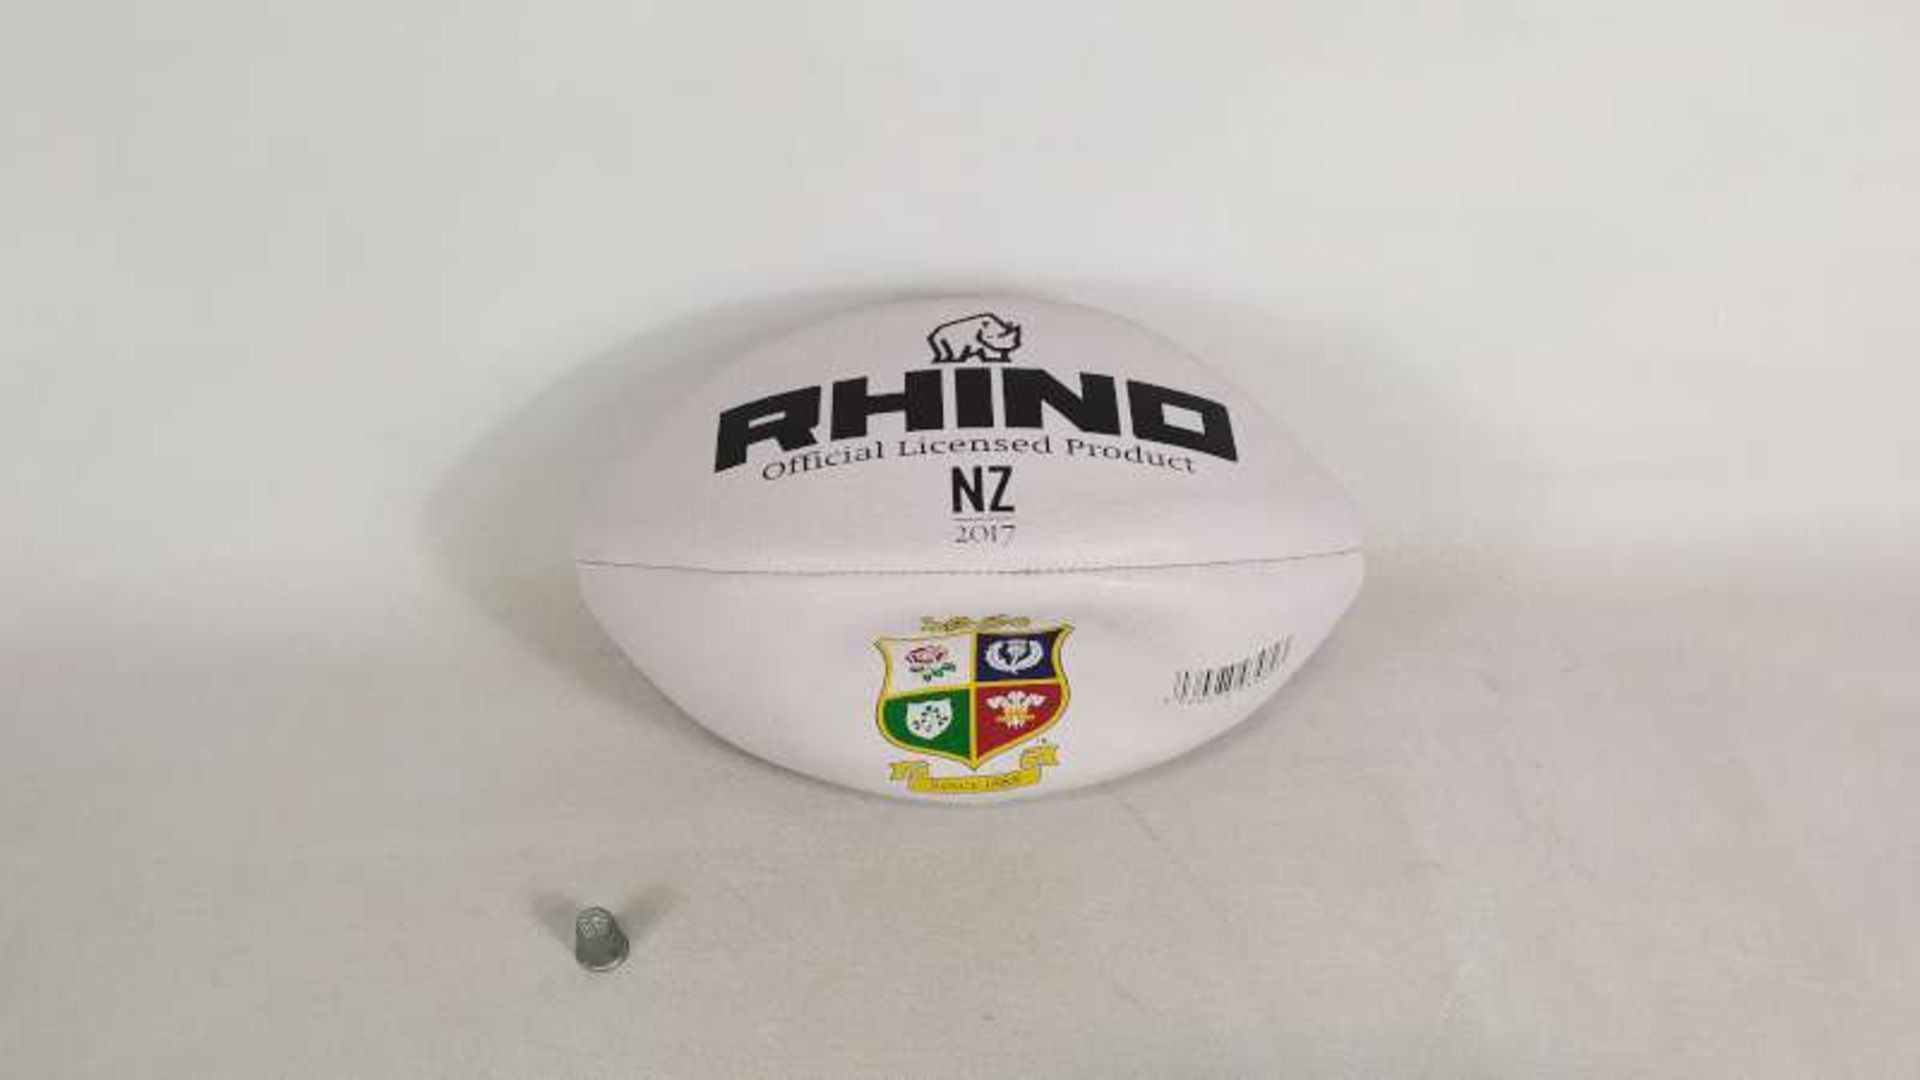 54 X BRAND NEW BOXED RHINO LIONS TOUR CLASSIC RUGBY BALLS IN 3 BOXES